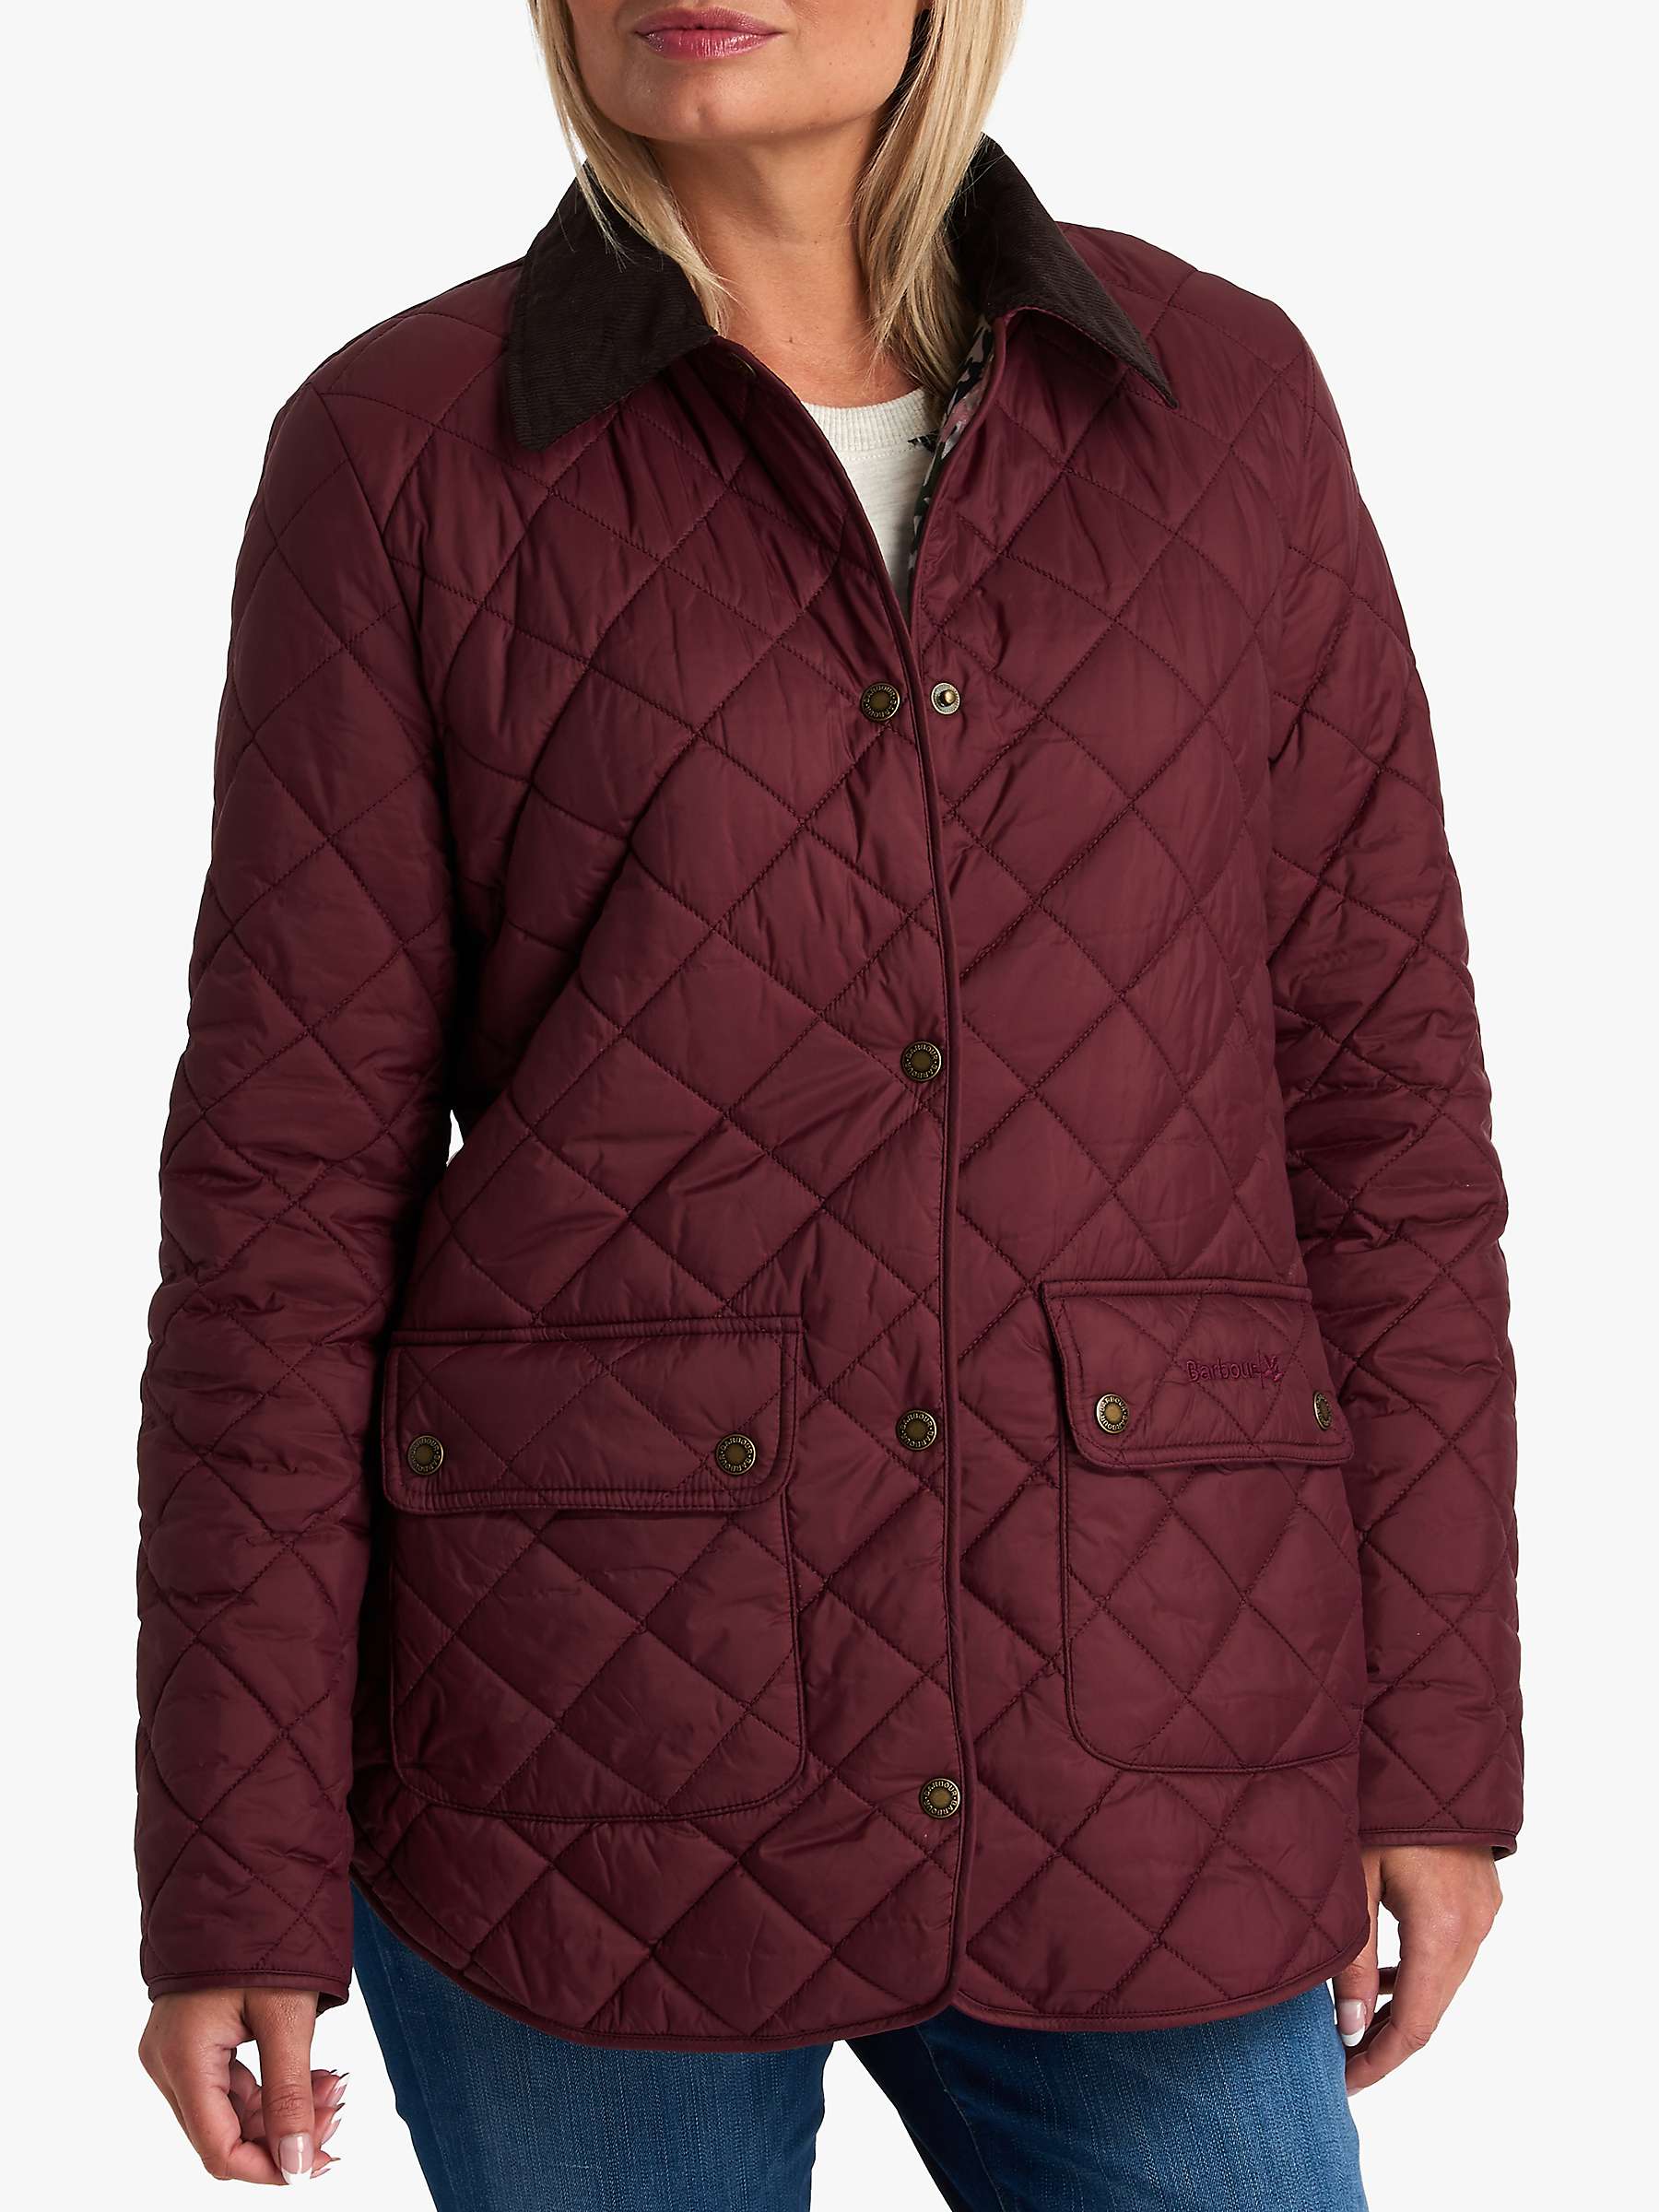 Barbour National Trust Moors Quilted Jacket, Burgundy at John Lewis ...